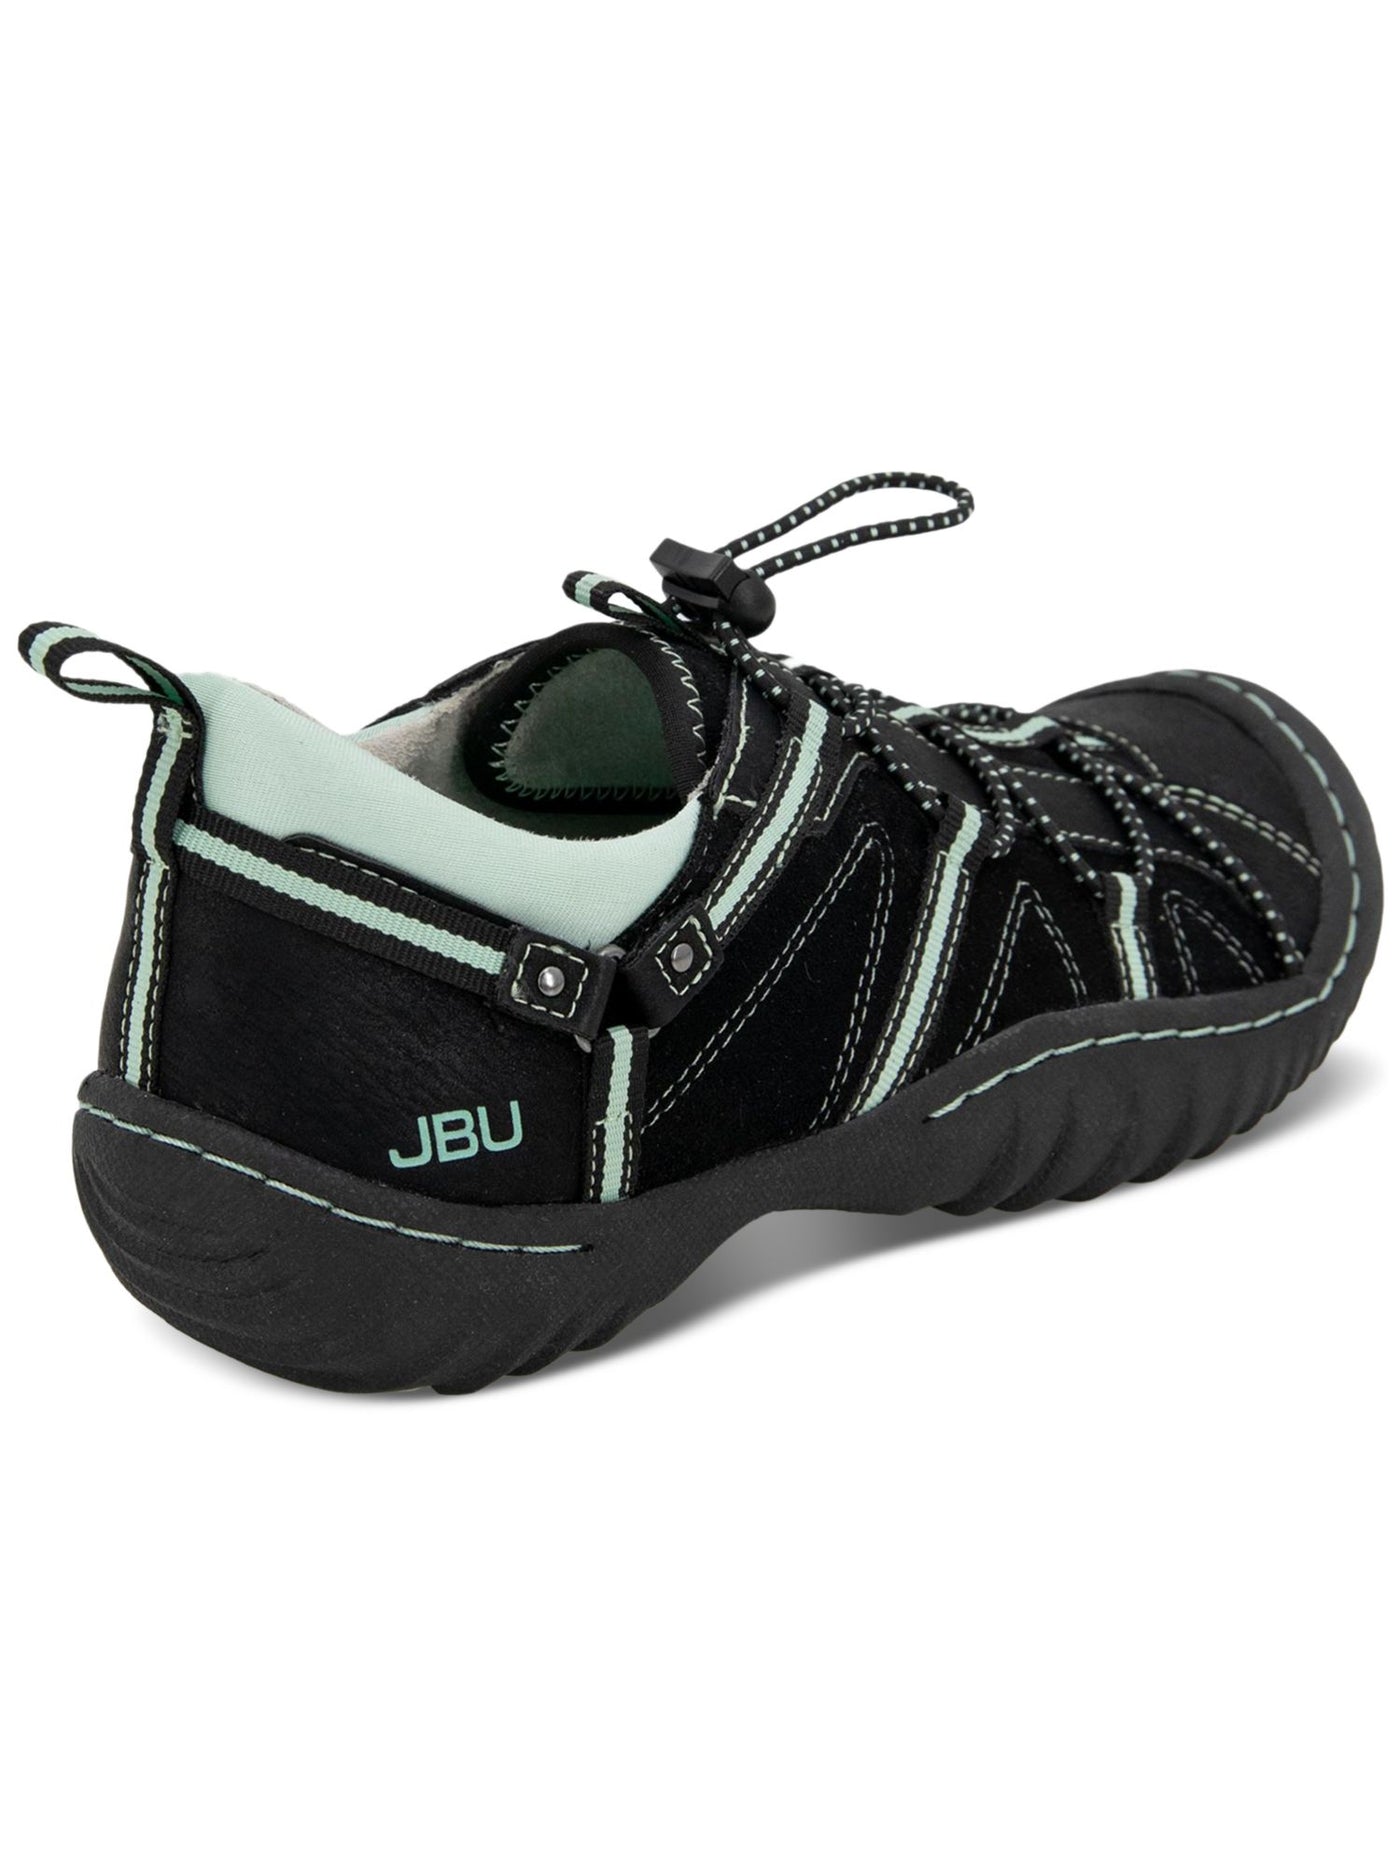 JBU BY JAMBU Womens Black Mixed Media Toggle Closure Back Pull-Tab Cushioned Synergy Pointy Toe Lace-Up Athletic Running Shoes 8 M